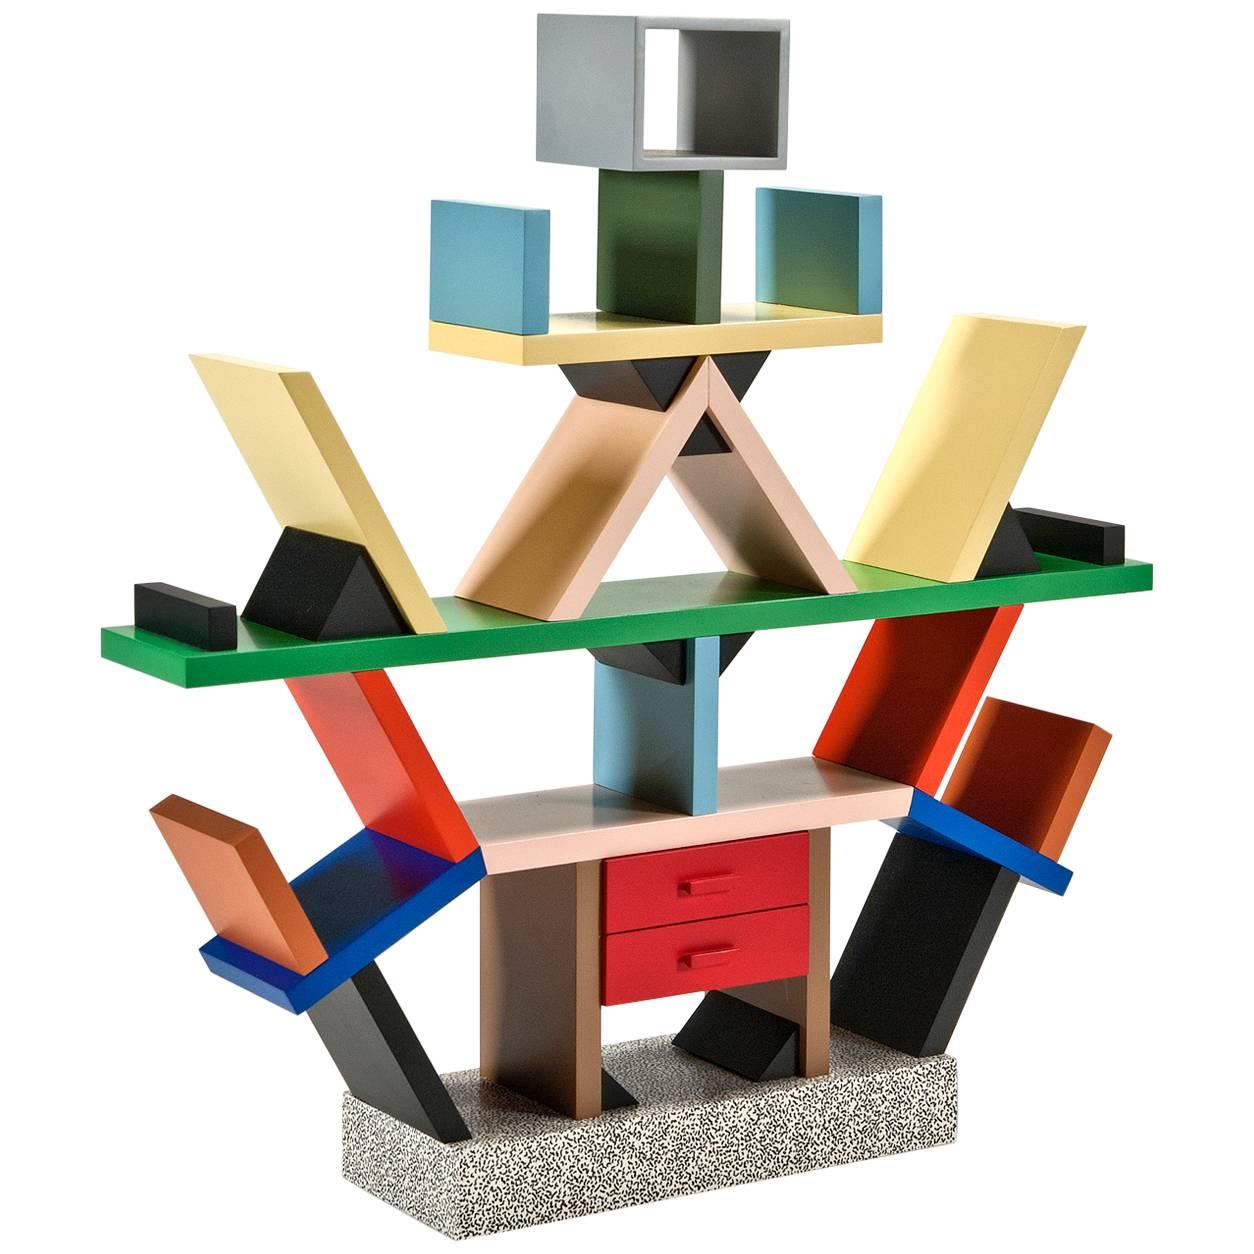 Carlton Bookcase '1:4 Scale Miniature' by Ettore Sottsass for Memphis